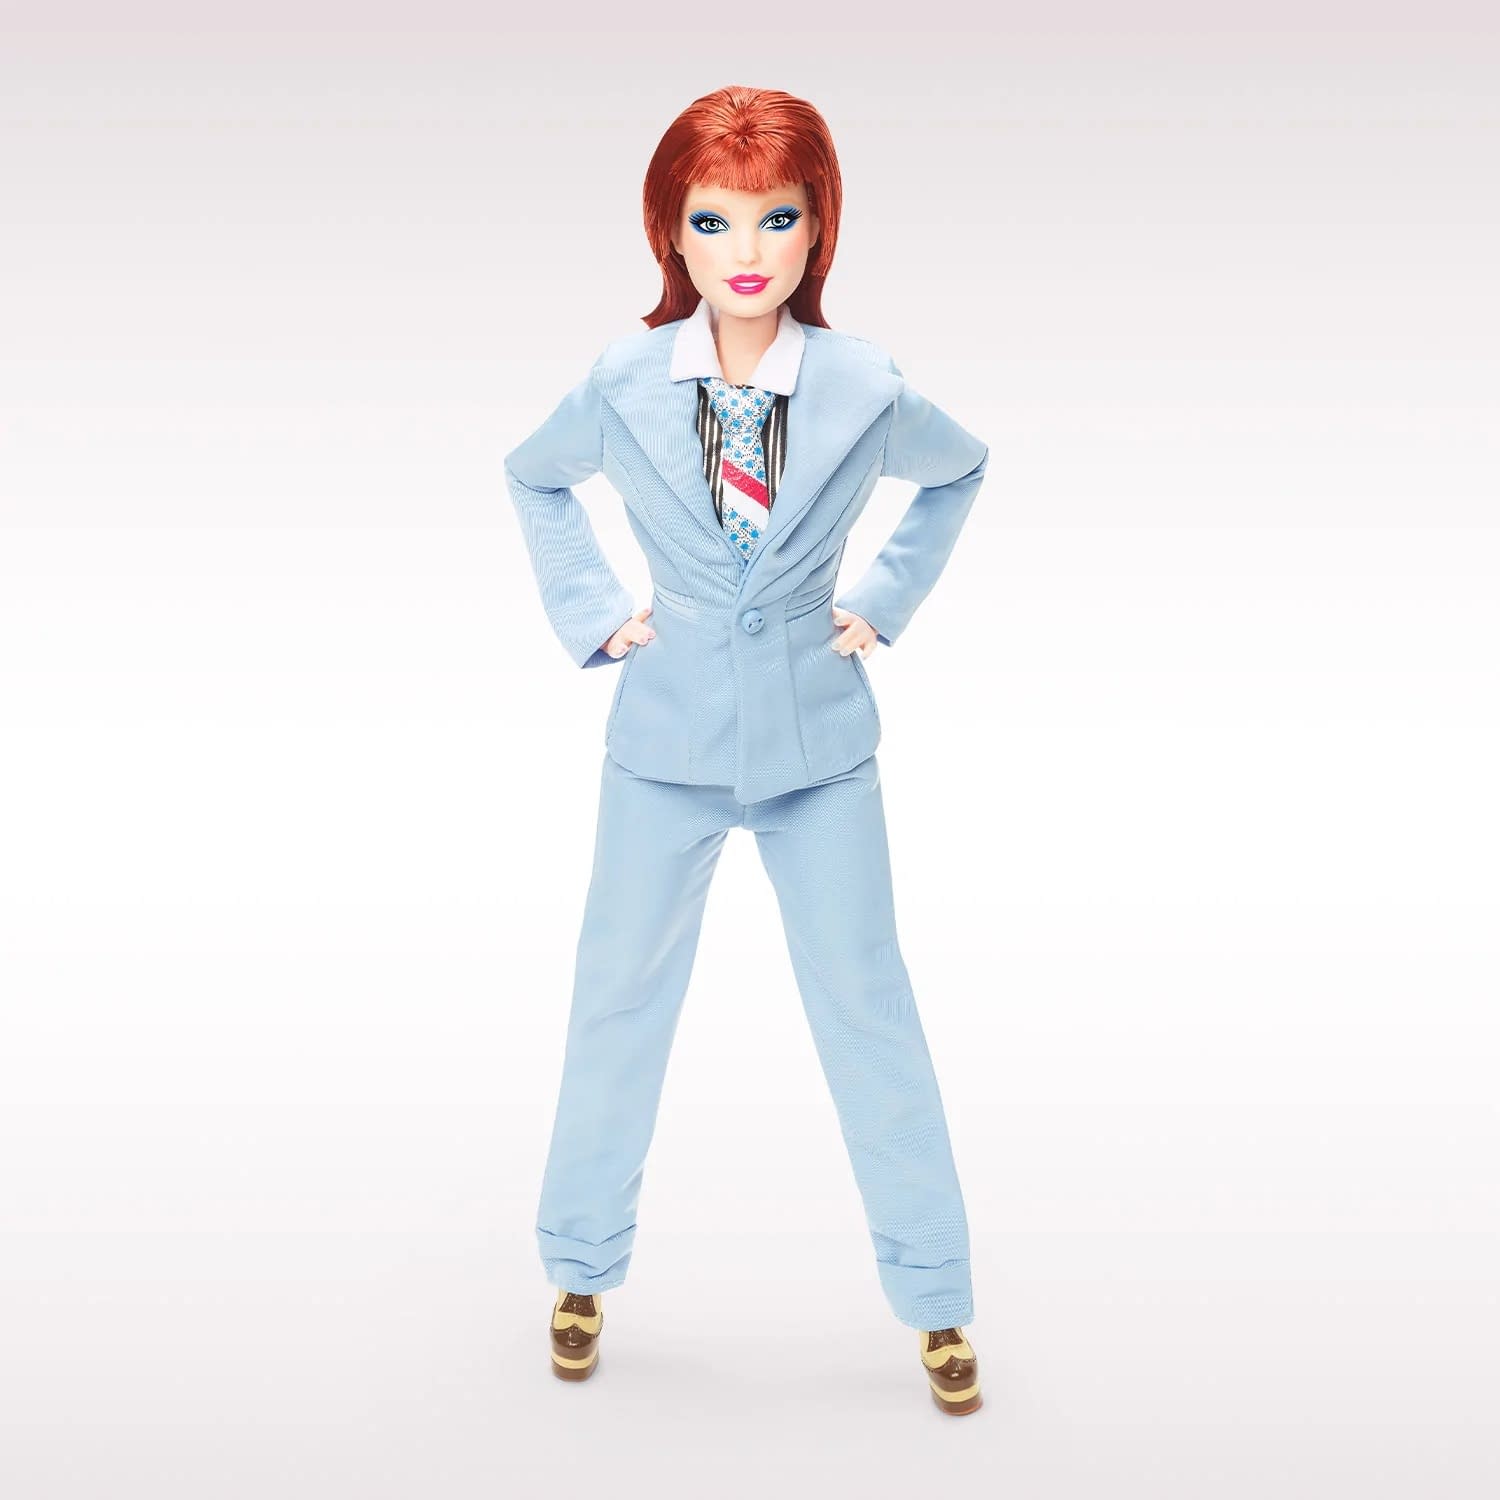 David Bowie's Life on Mars? Receives a New Barbie from Mattel